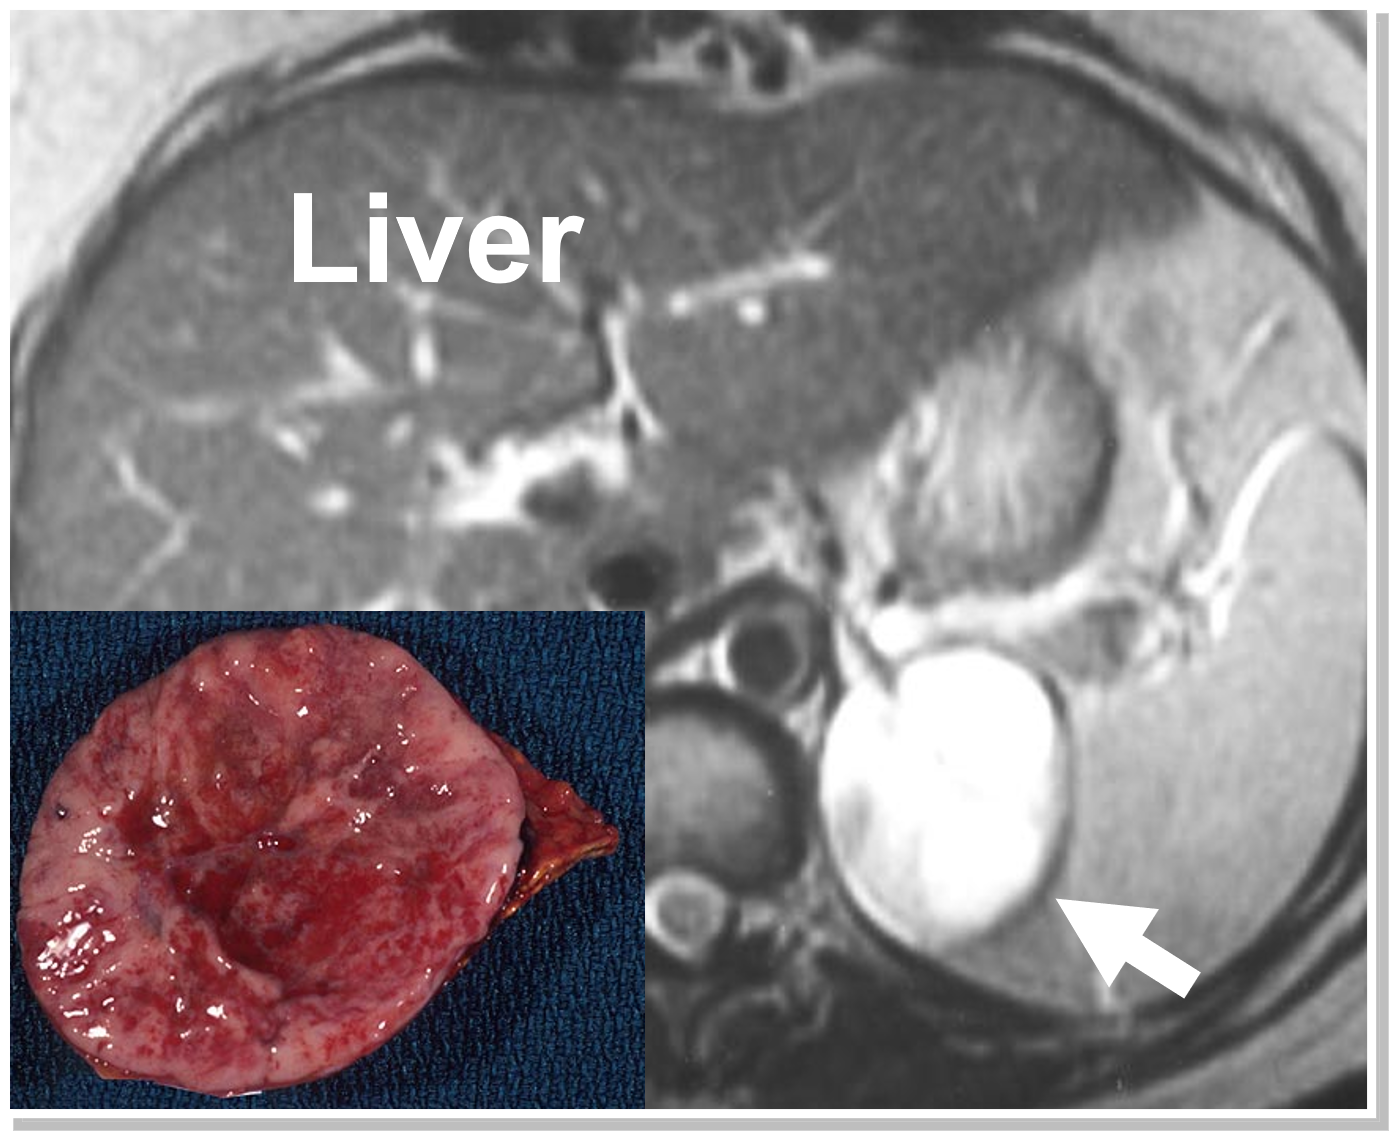 An MRI and gross pathology after removal demonstrating a left pheochromocytoma. Often pheochromocytomas enhance (light up brightly) on an MRI scan which is so characteristic that it by itself clinches the diagnosis.  